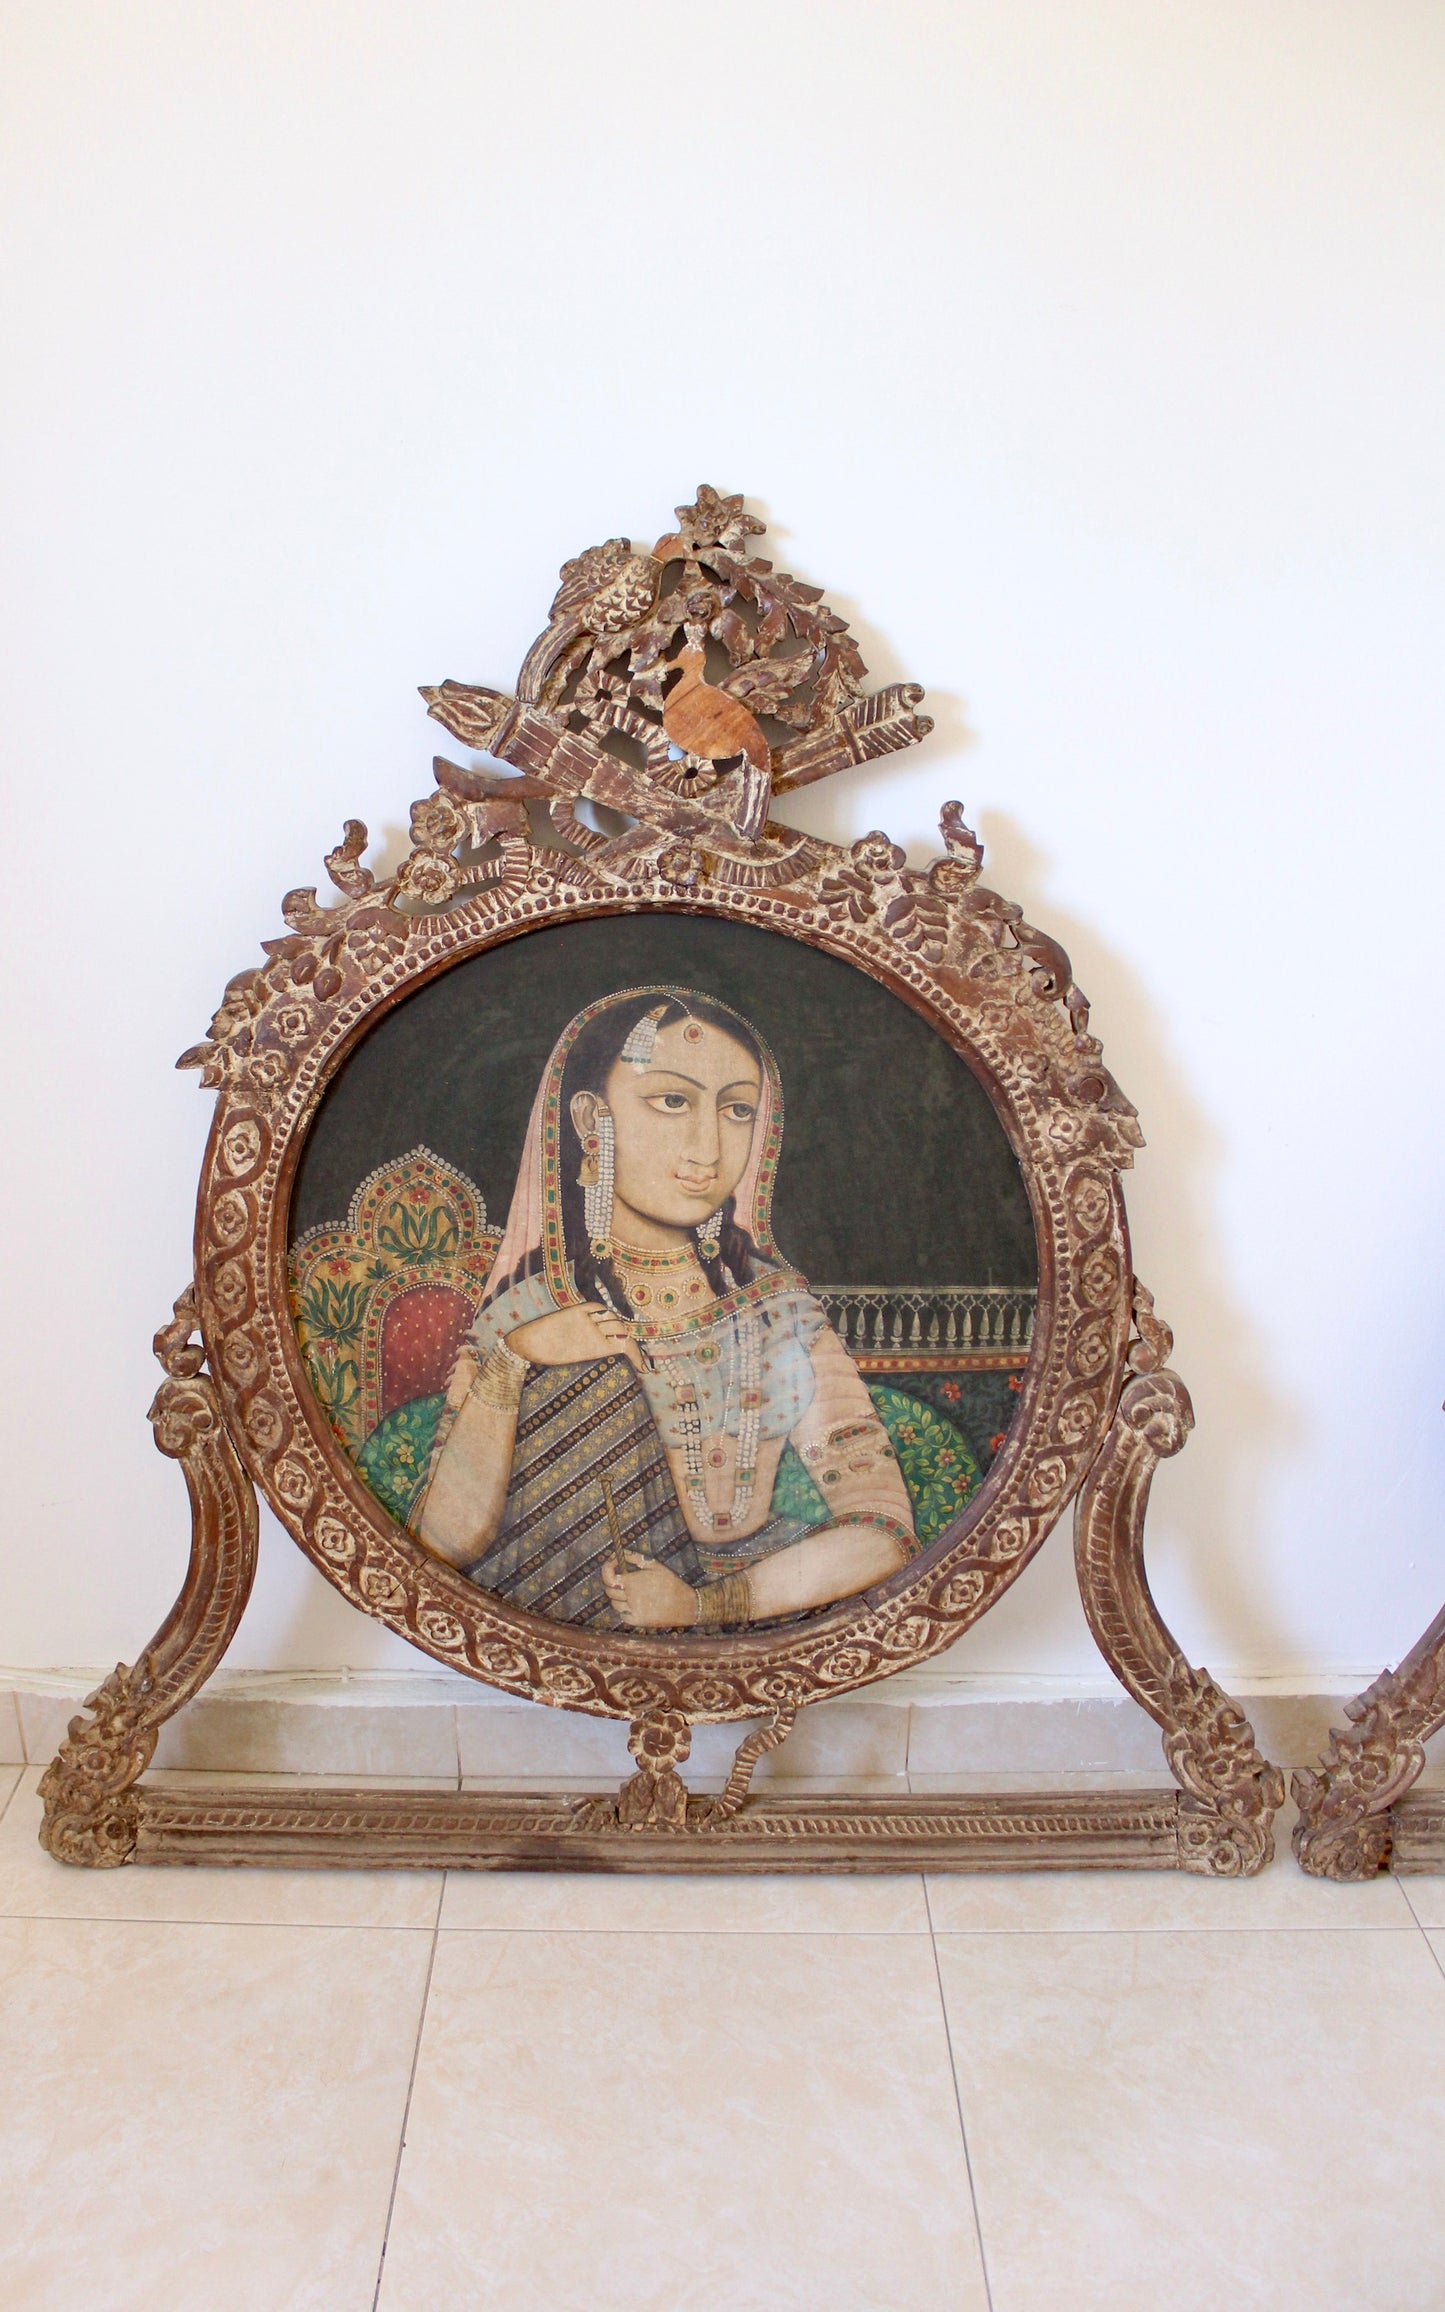 Pair of Exquisite 19th Century Indian Mughal Portraits